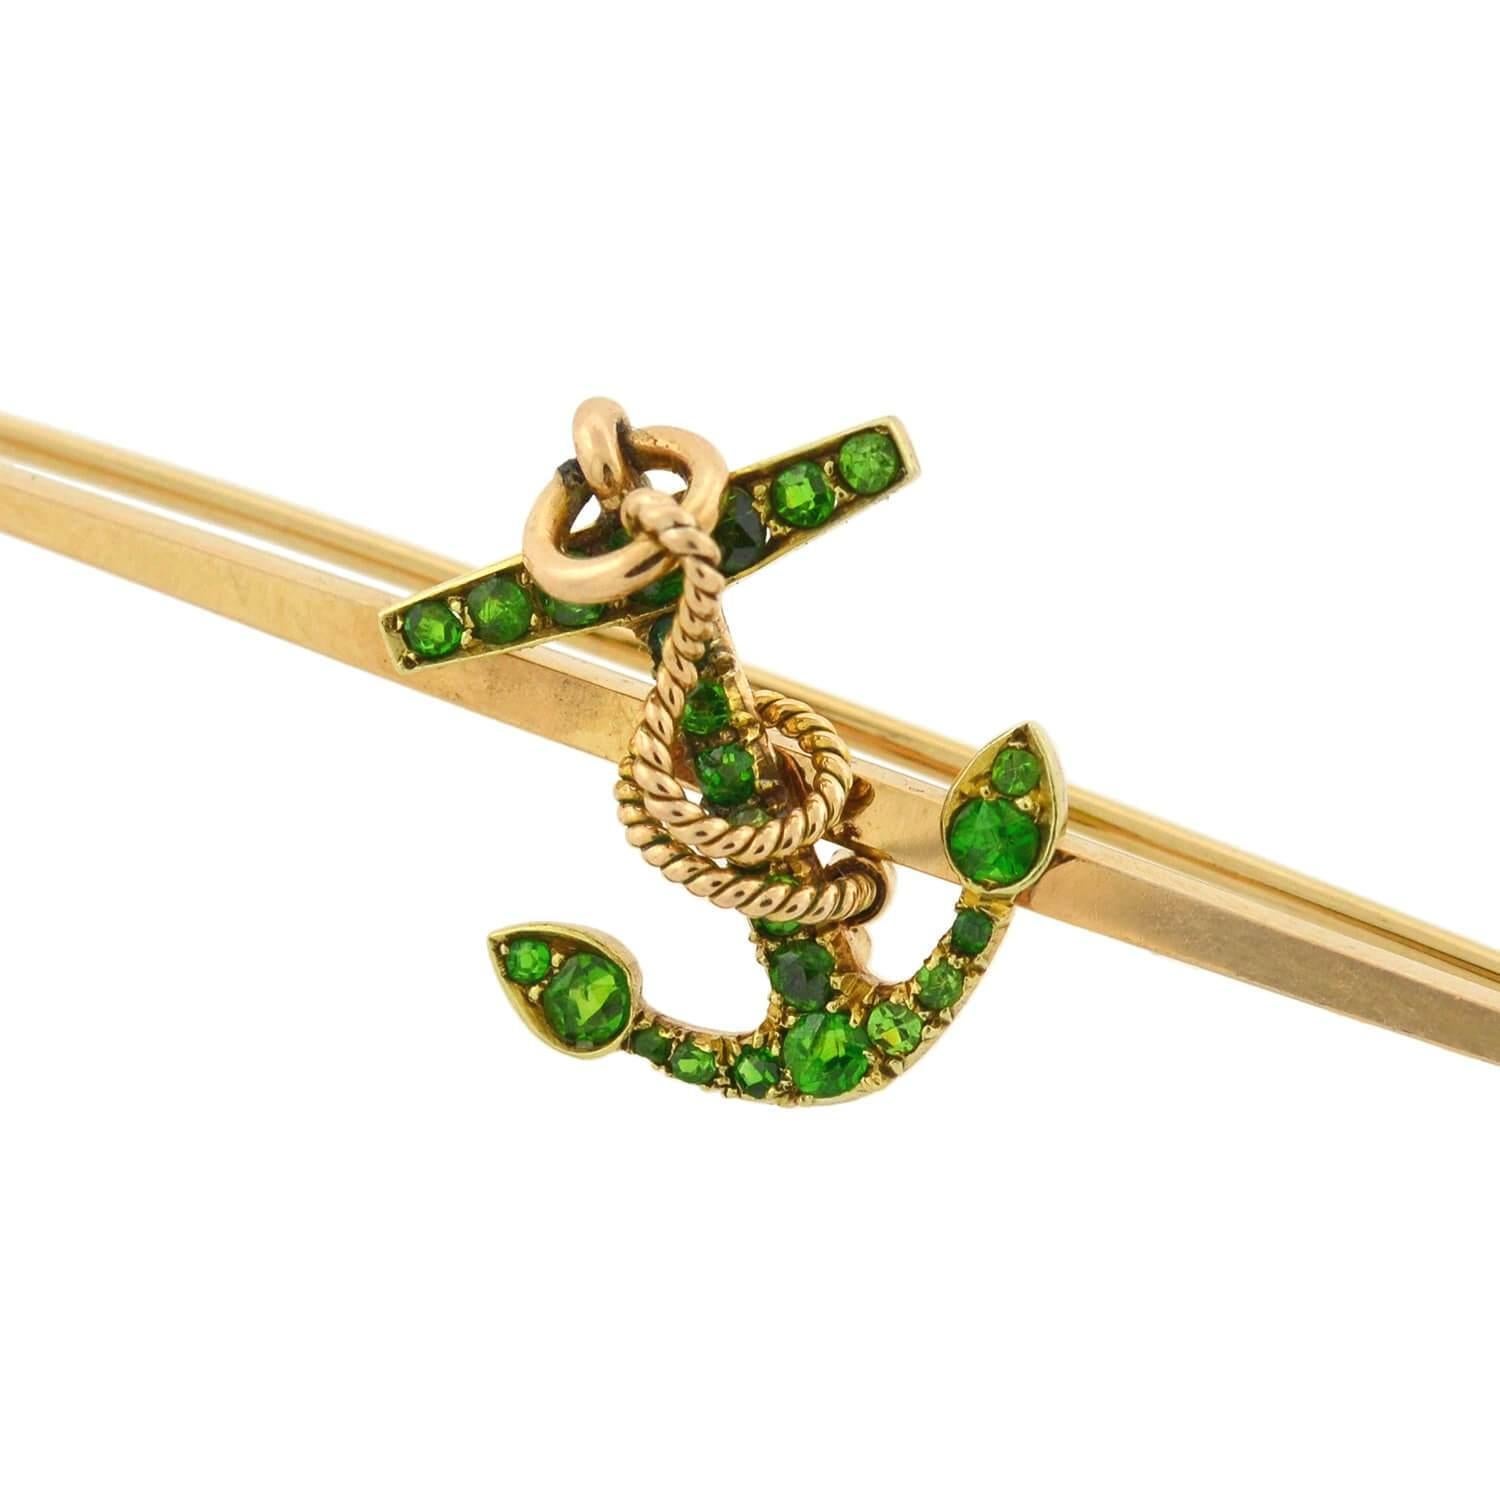 An incredible diamond anchor bar pin from the Victorian (ca1880) era! This beautiful brooch is crafted in 14kt gold, and has a stylish nautical design. Decorating the center of the gold bar is a stunning gemstone anchor, which is riveted into the